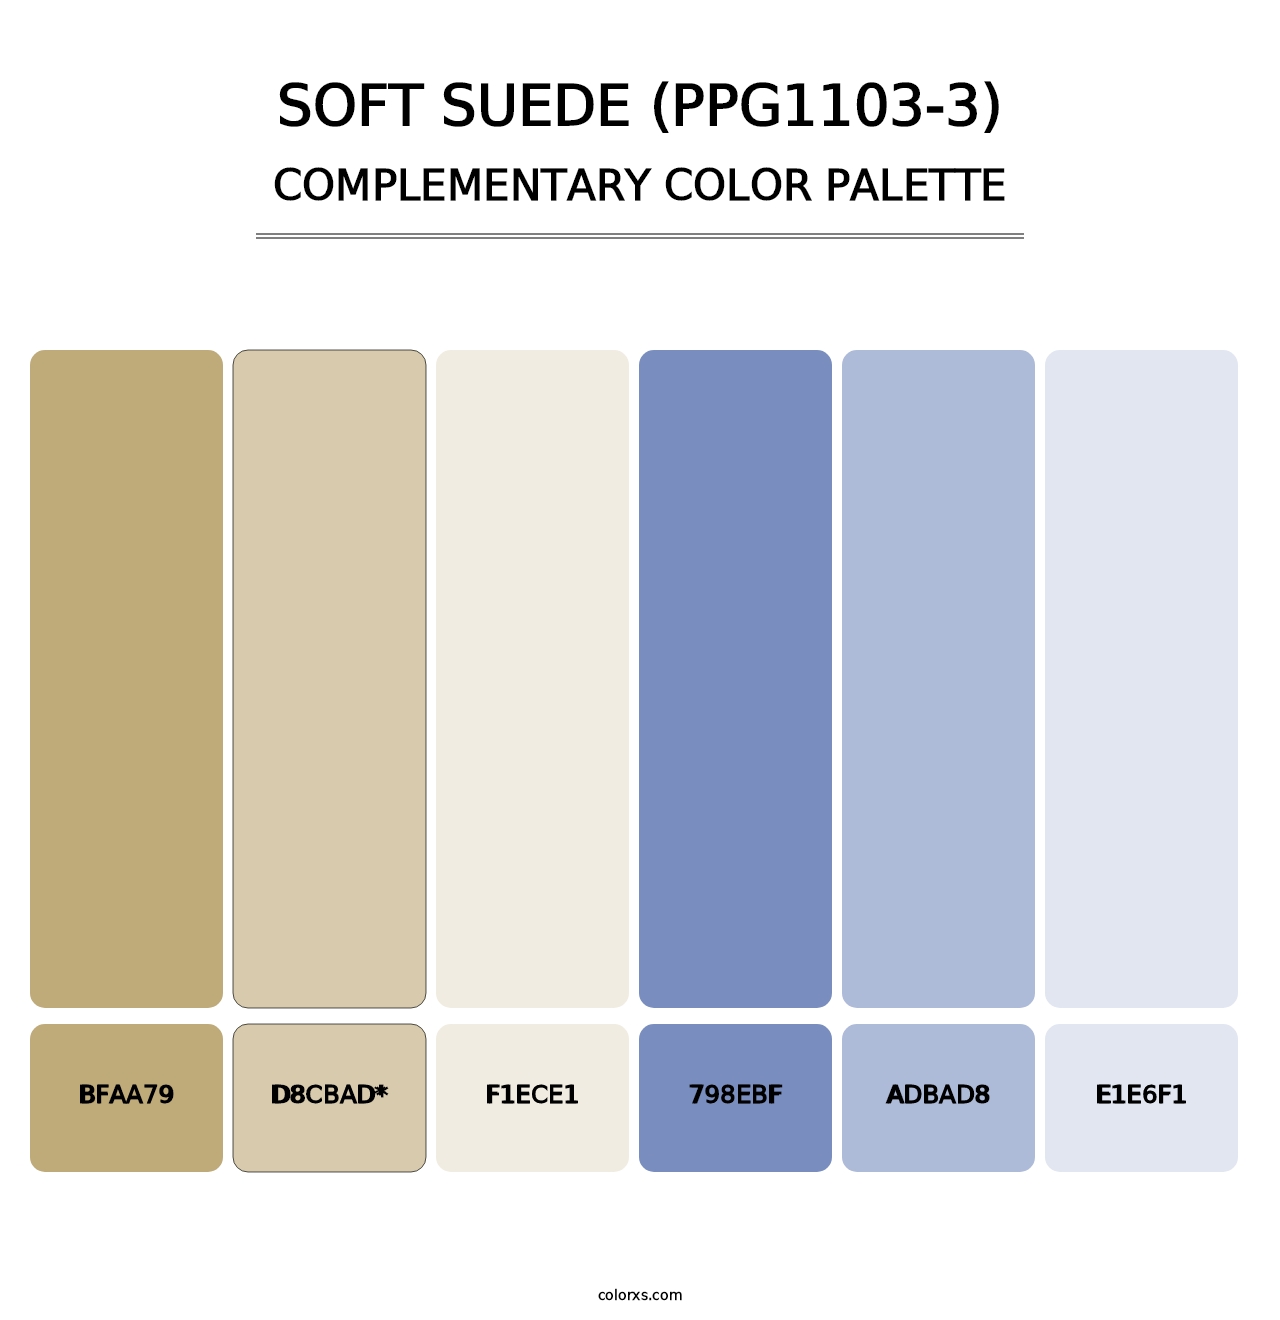 Soft Suede (PPG1103-3) - Complementary Color Palette